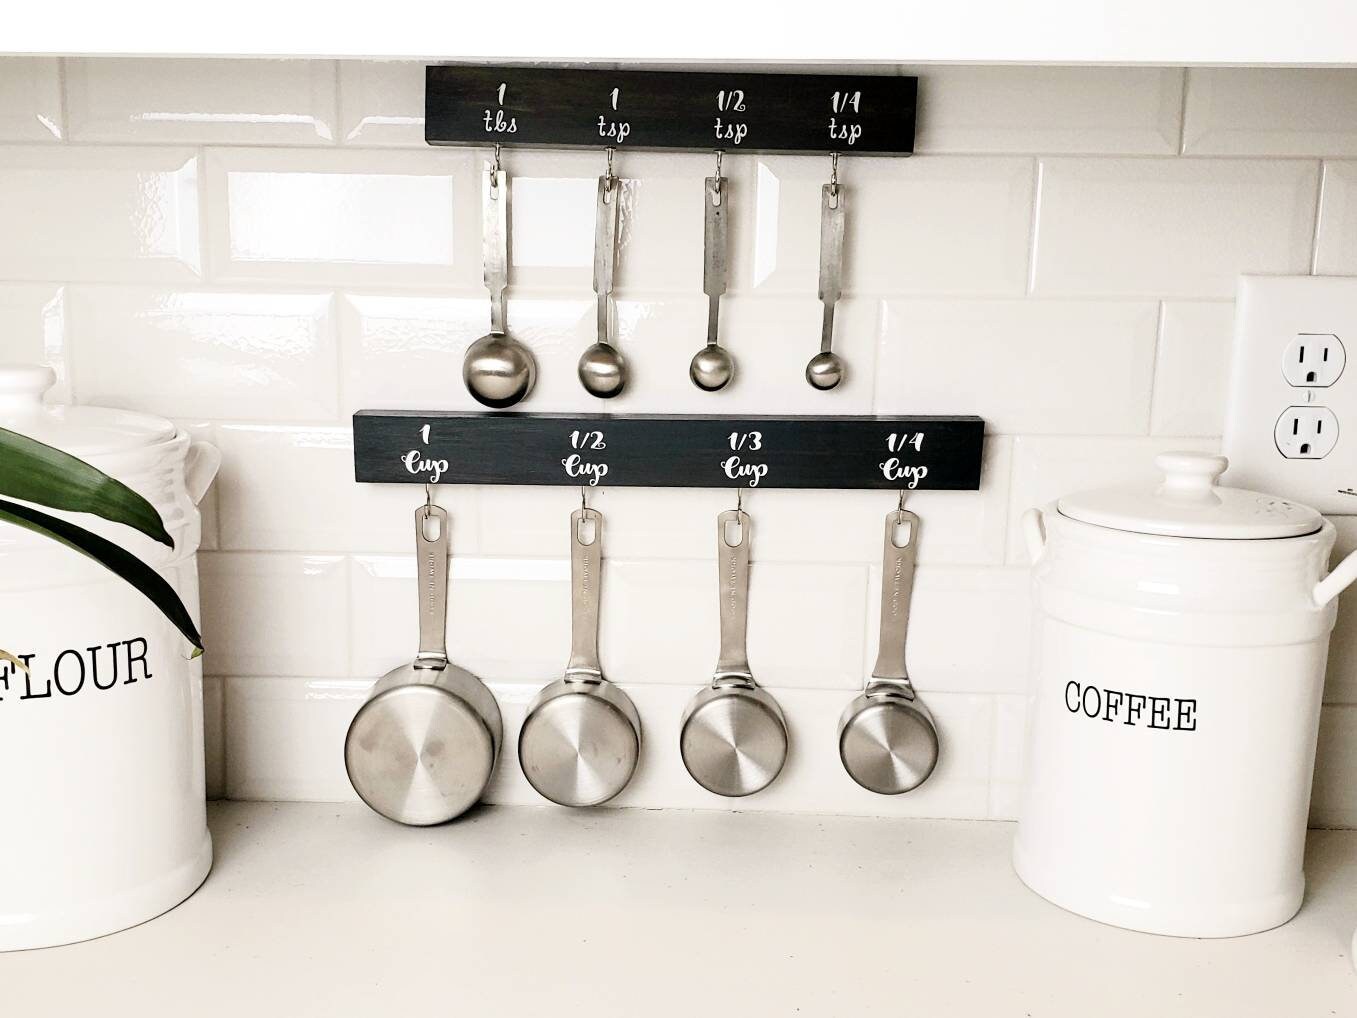 Easy-access measuring cup/spoon holder I made (an modified a few times) :  r/OrganizationPorn